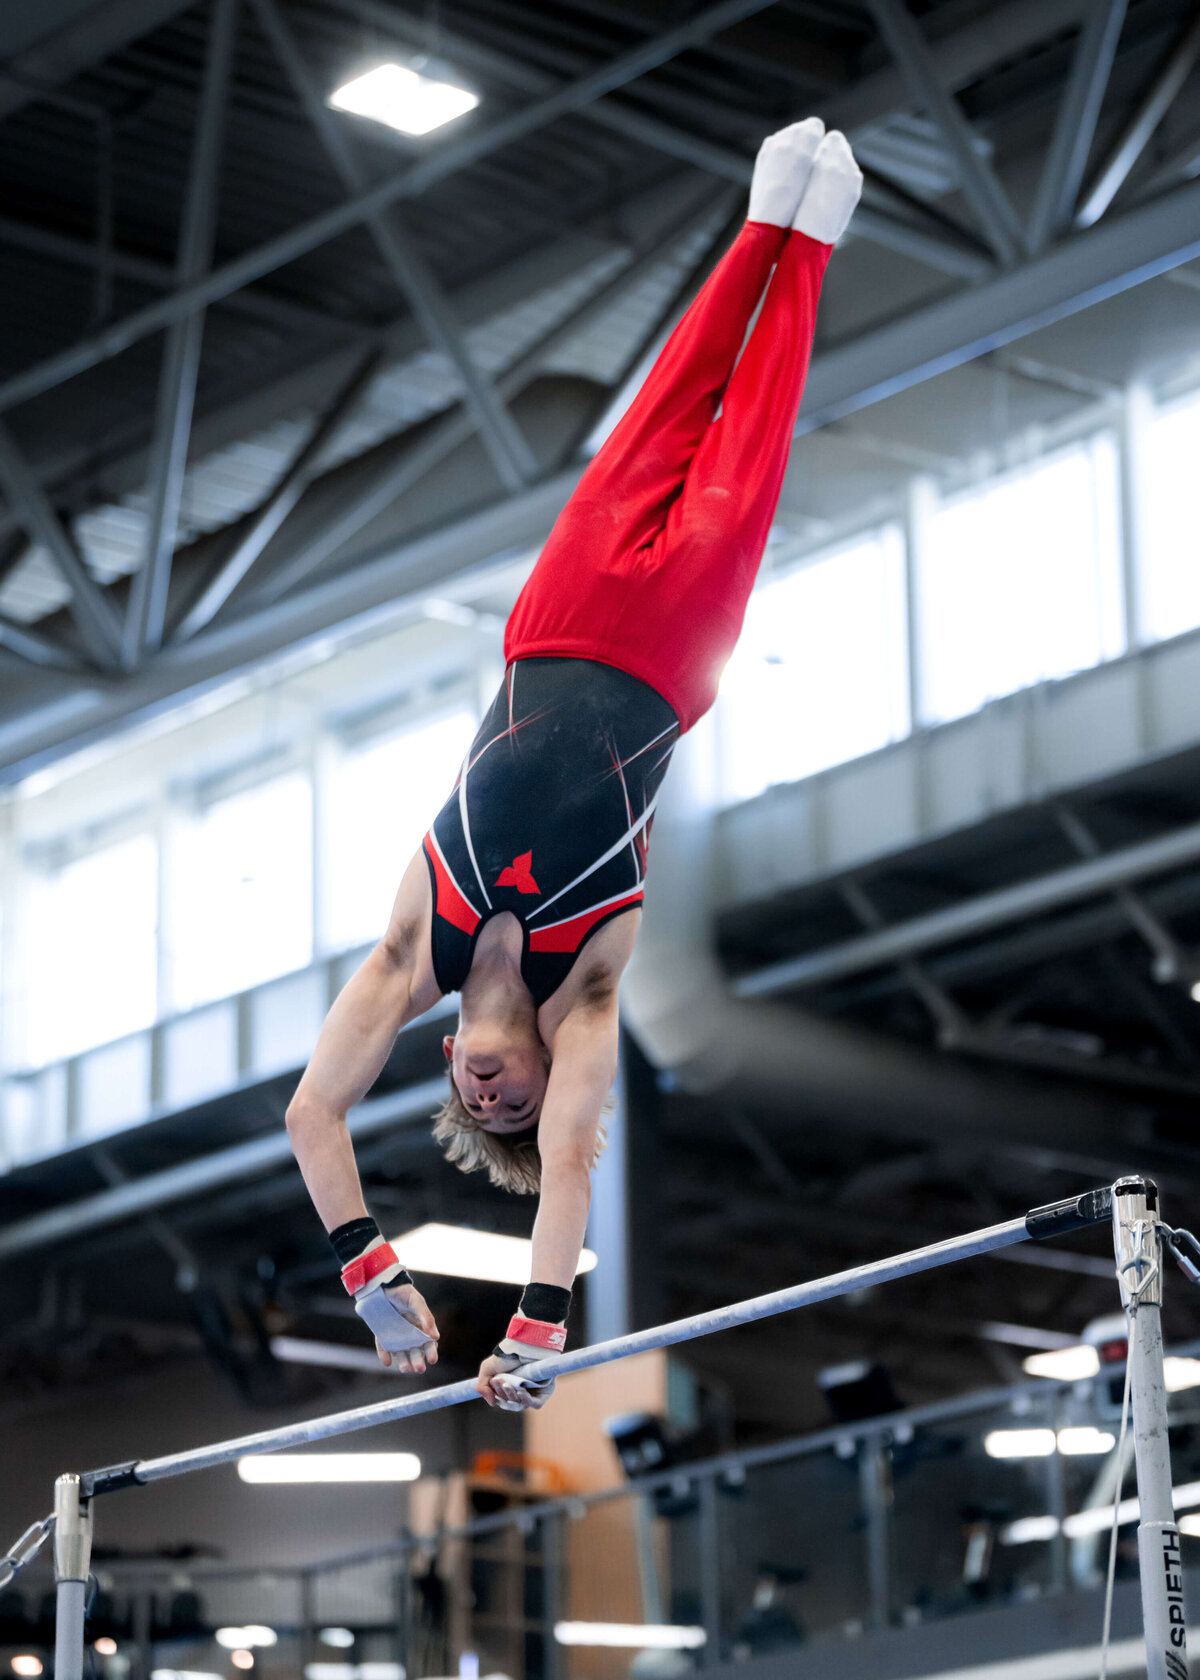 Photo by Luke O'Geil taken at the 2023 inaugural Grizzly Classic men's artistic gymnastics competitionA1_02711